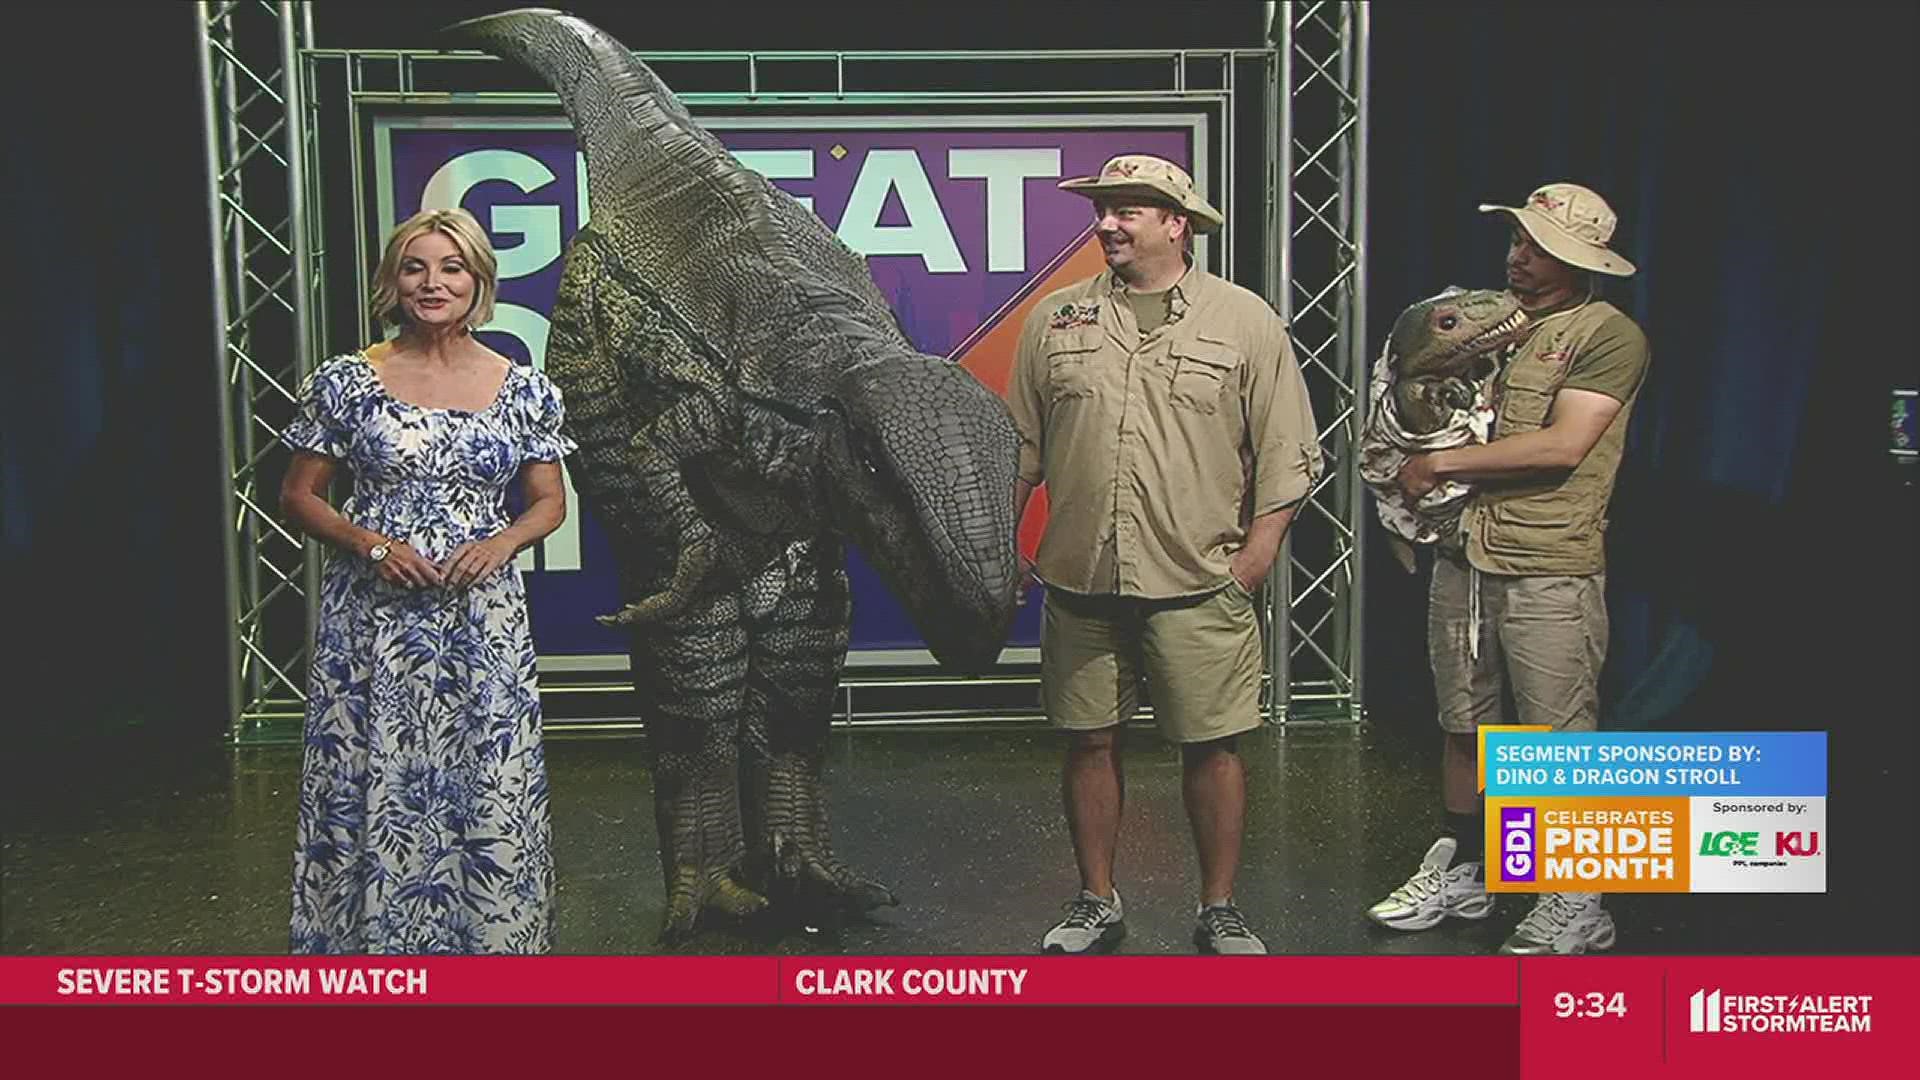 They are here from June 18 & 19 at the Kentucky's Expo Center! Check out DinoandDragonstroll.com for more information!